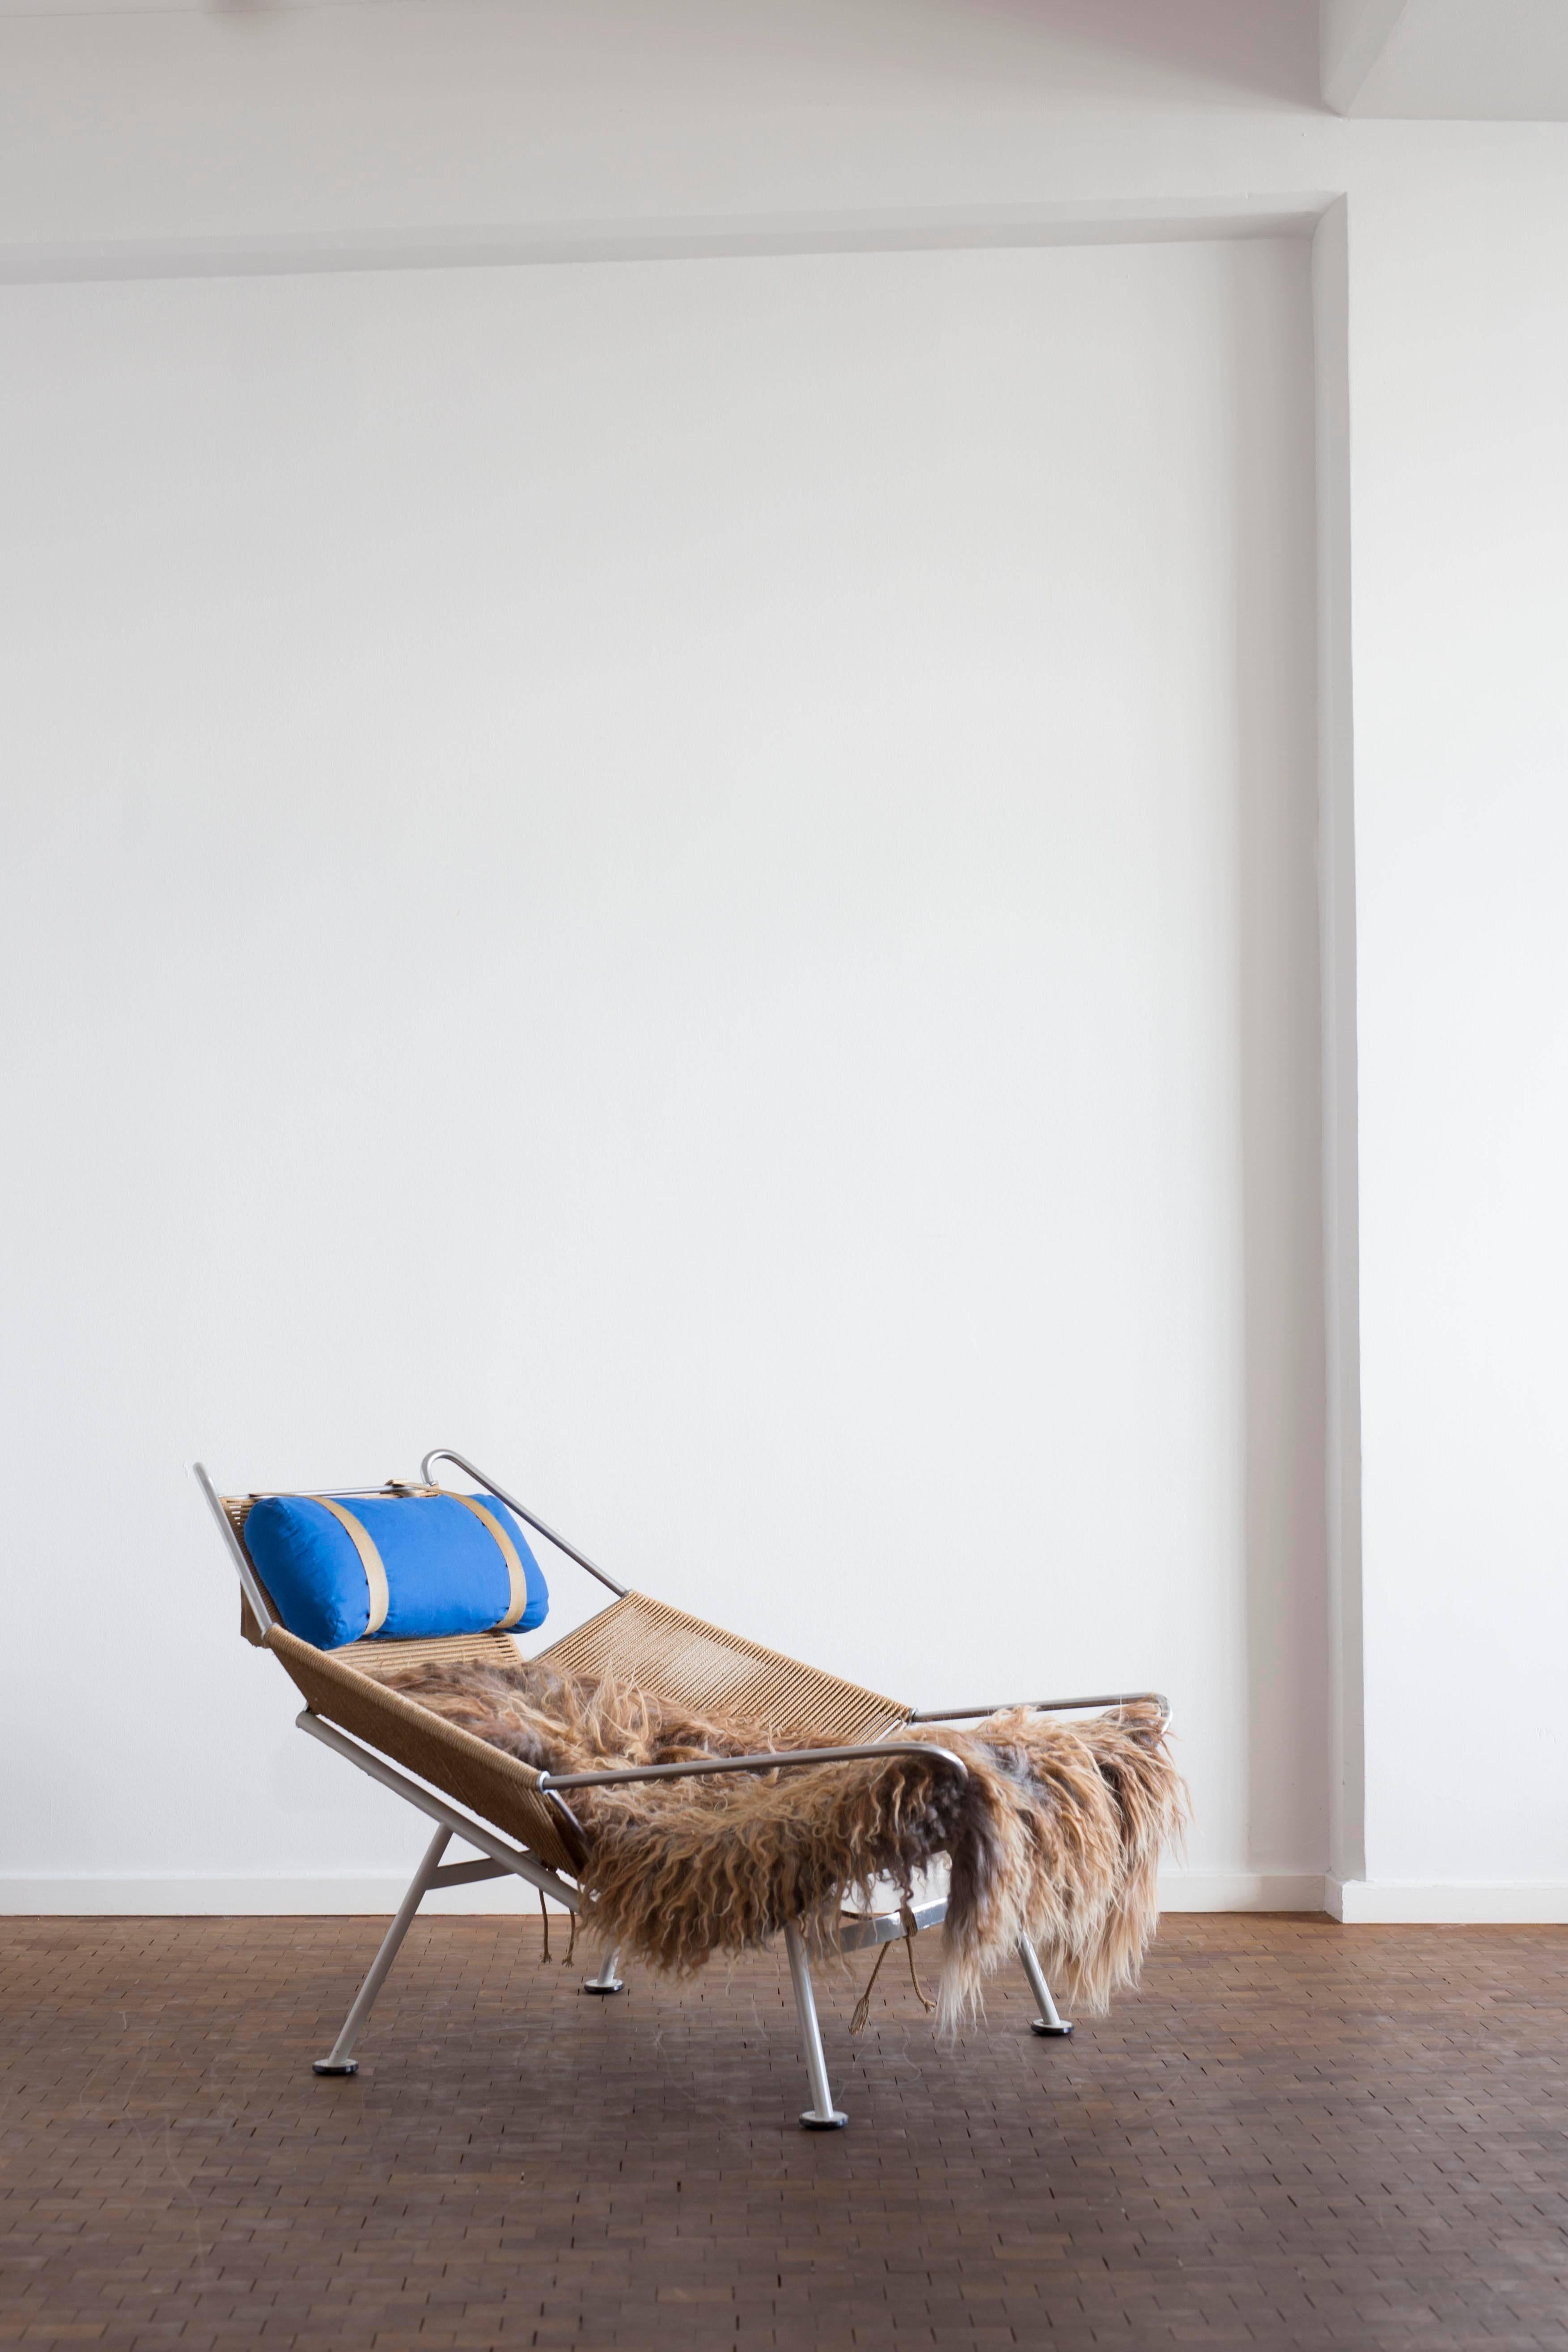 Hans J. Wegner flag halyard easy chair with original white lacquered steel frame, cushion in blue fabric and a sheepskin throw. 

Designed by Hans J. Wegner in 1950 and manufactured by GETAMA, Denmark, circa end of 1950s-1960s, model GE225.

Very